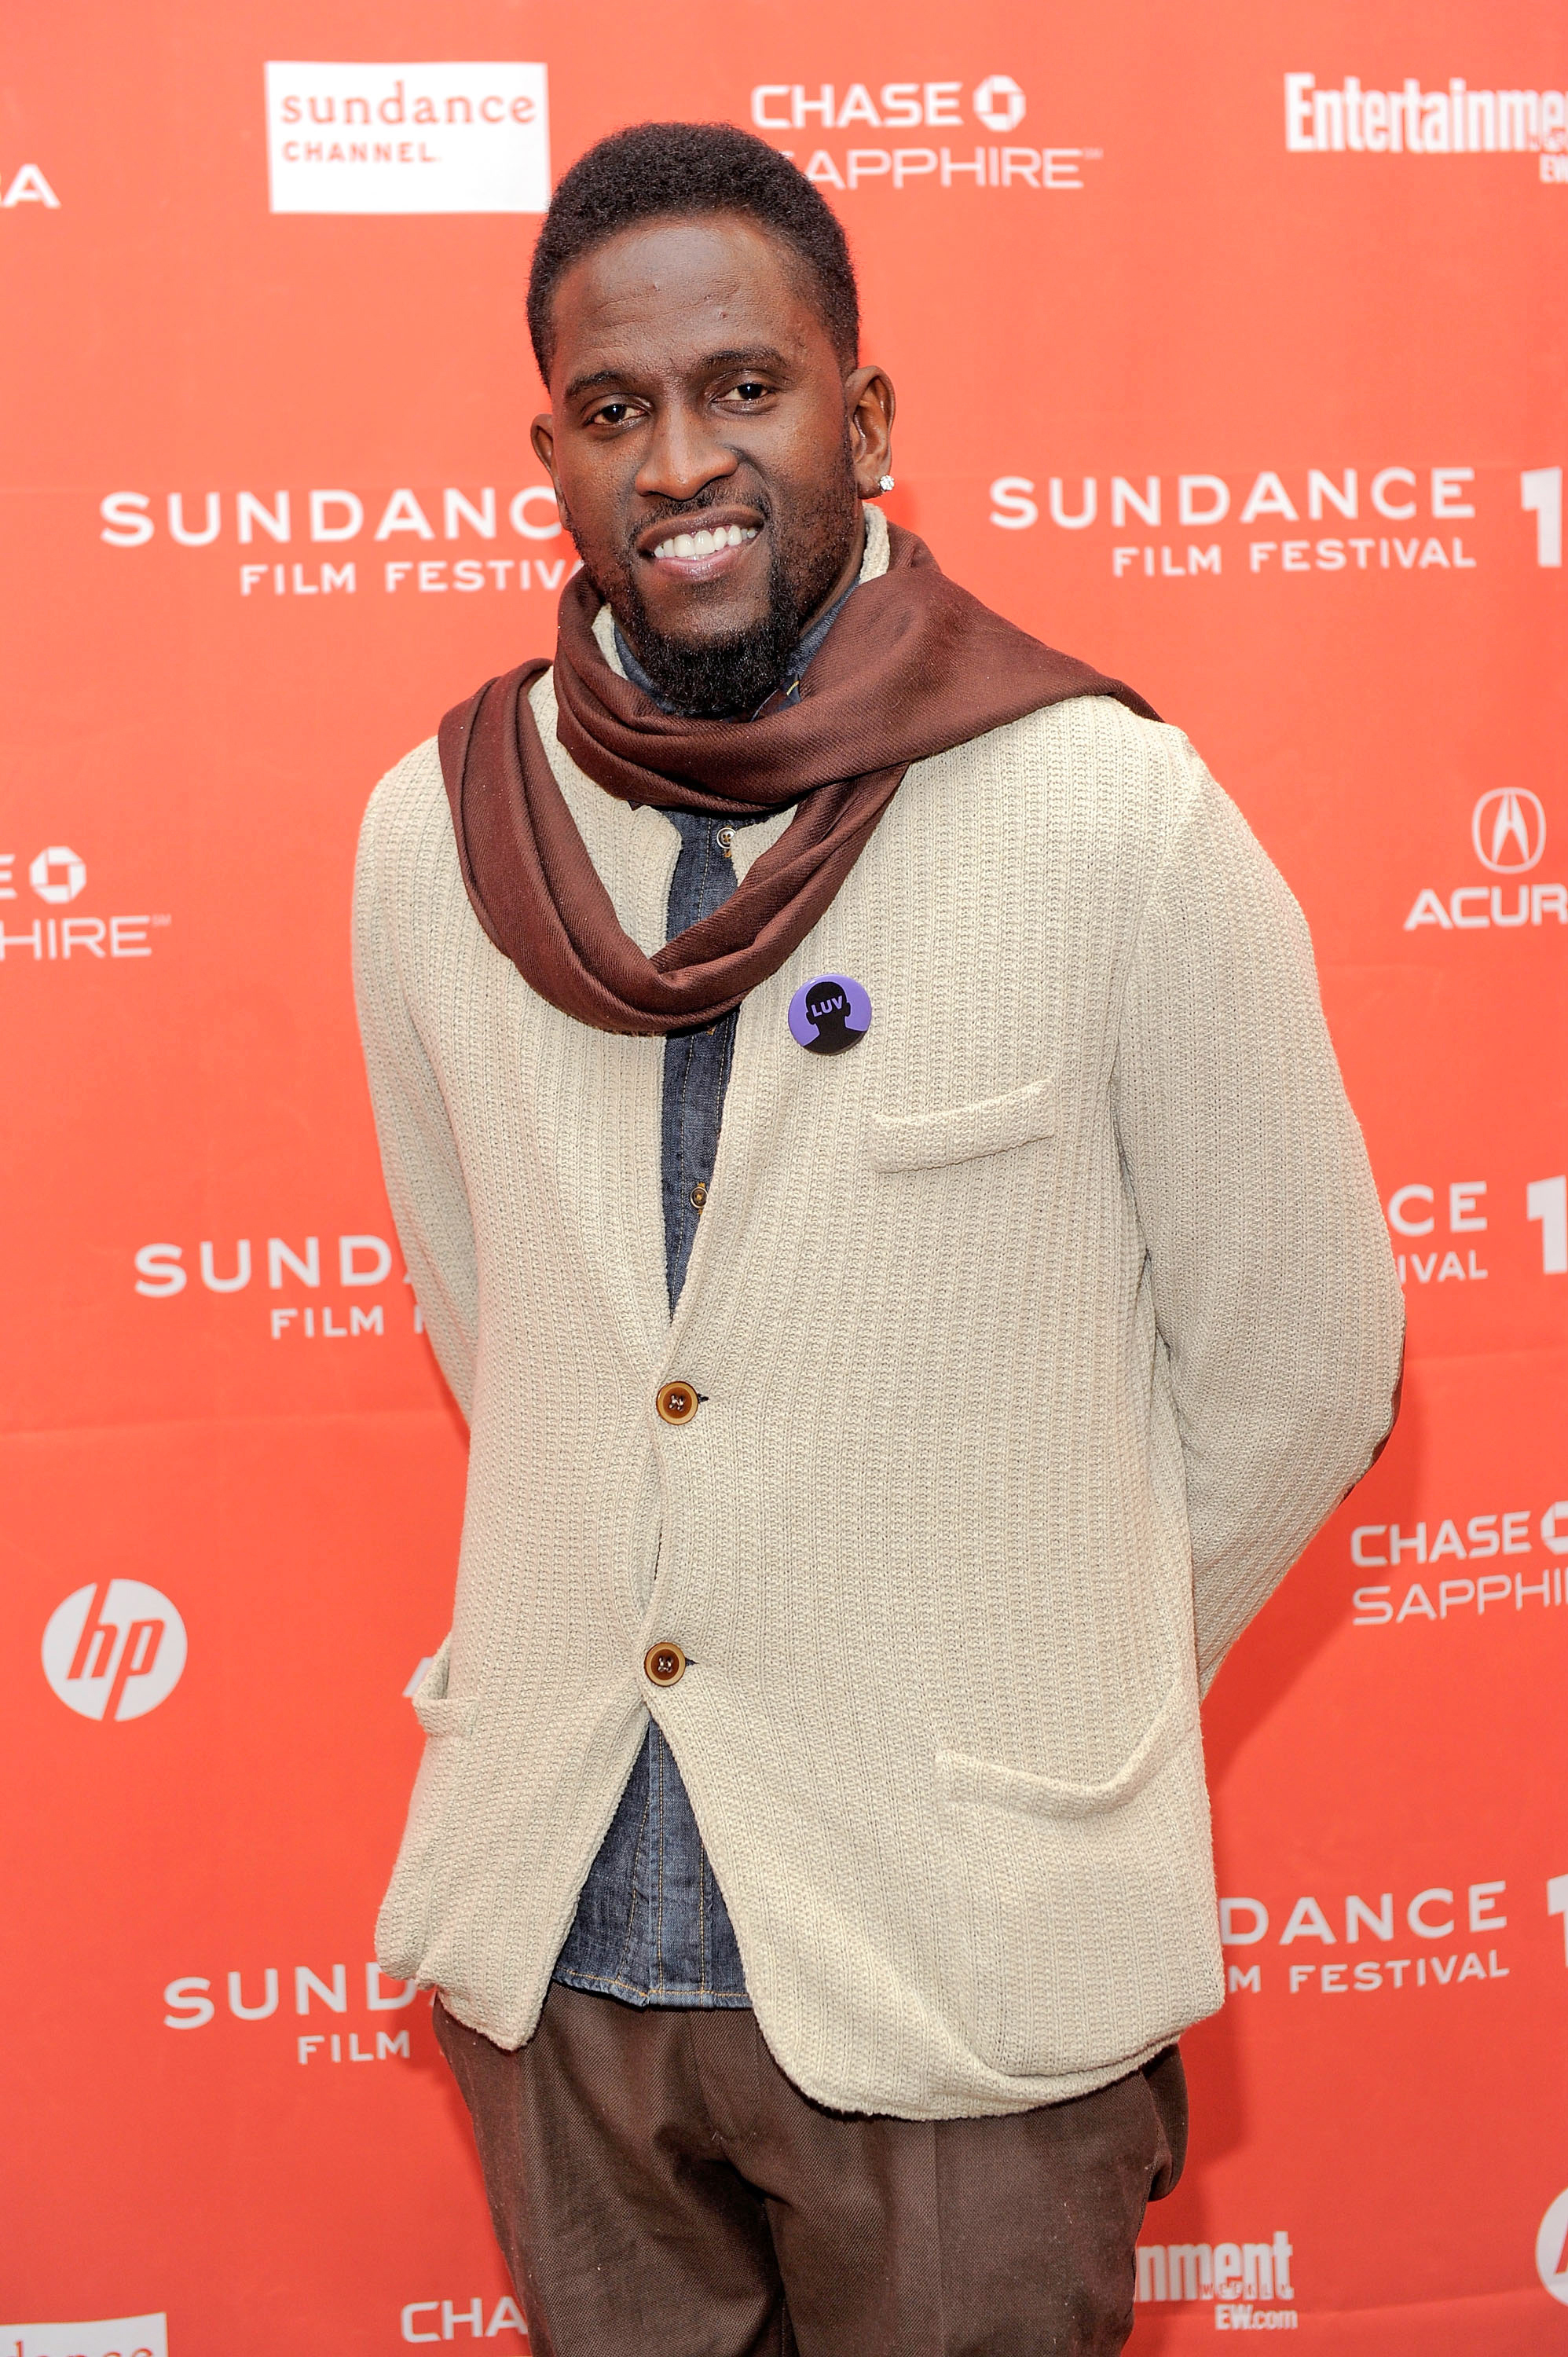 Anwan Glover attends the "LUV" premiere during the 2012 Sundance Film Festival held at Eccles Center Theatre on Jan. 23, 2012 in Park City, Utah. (Jemal Countess—Getty Images)